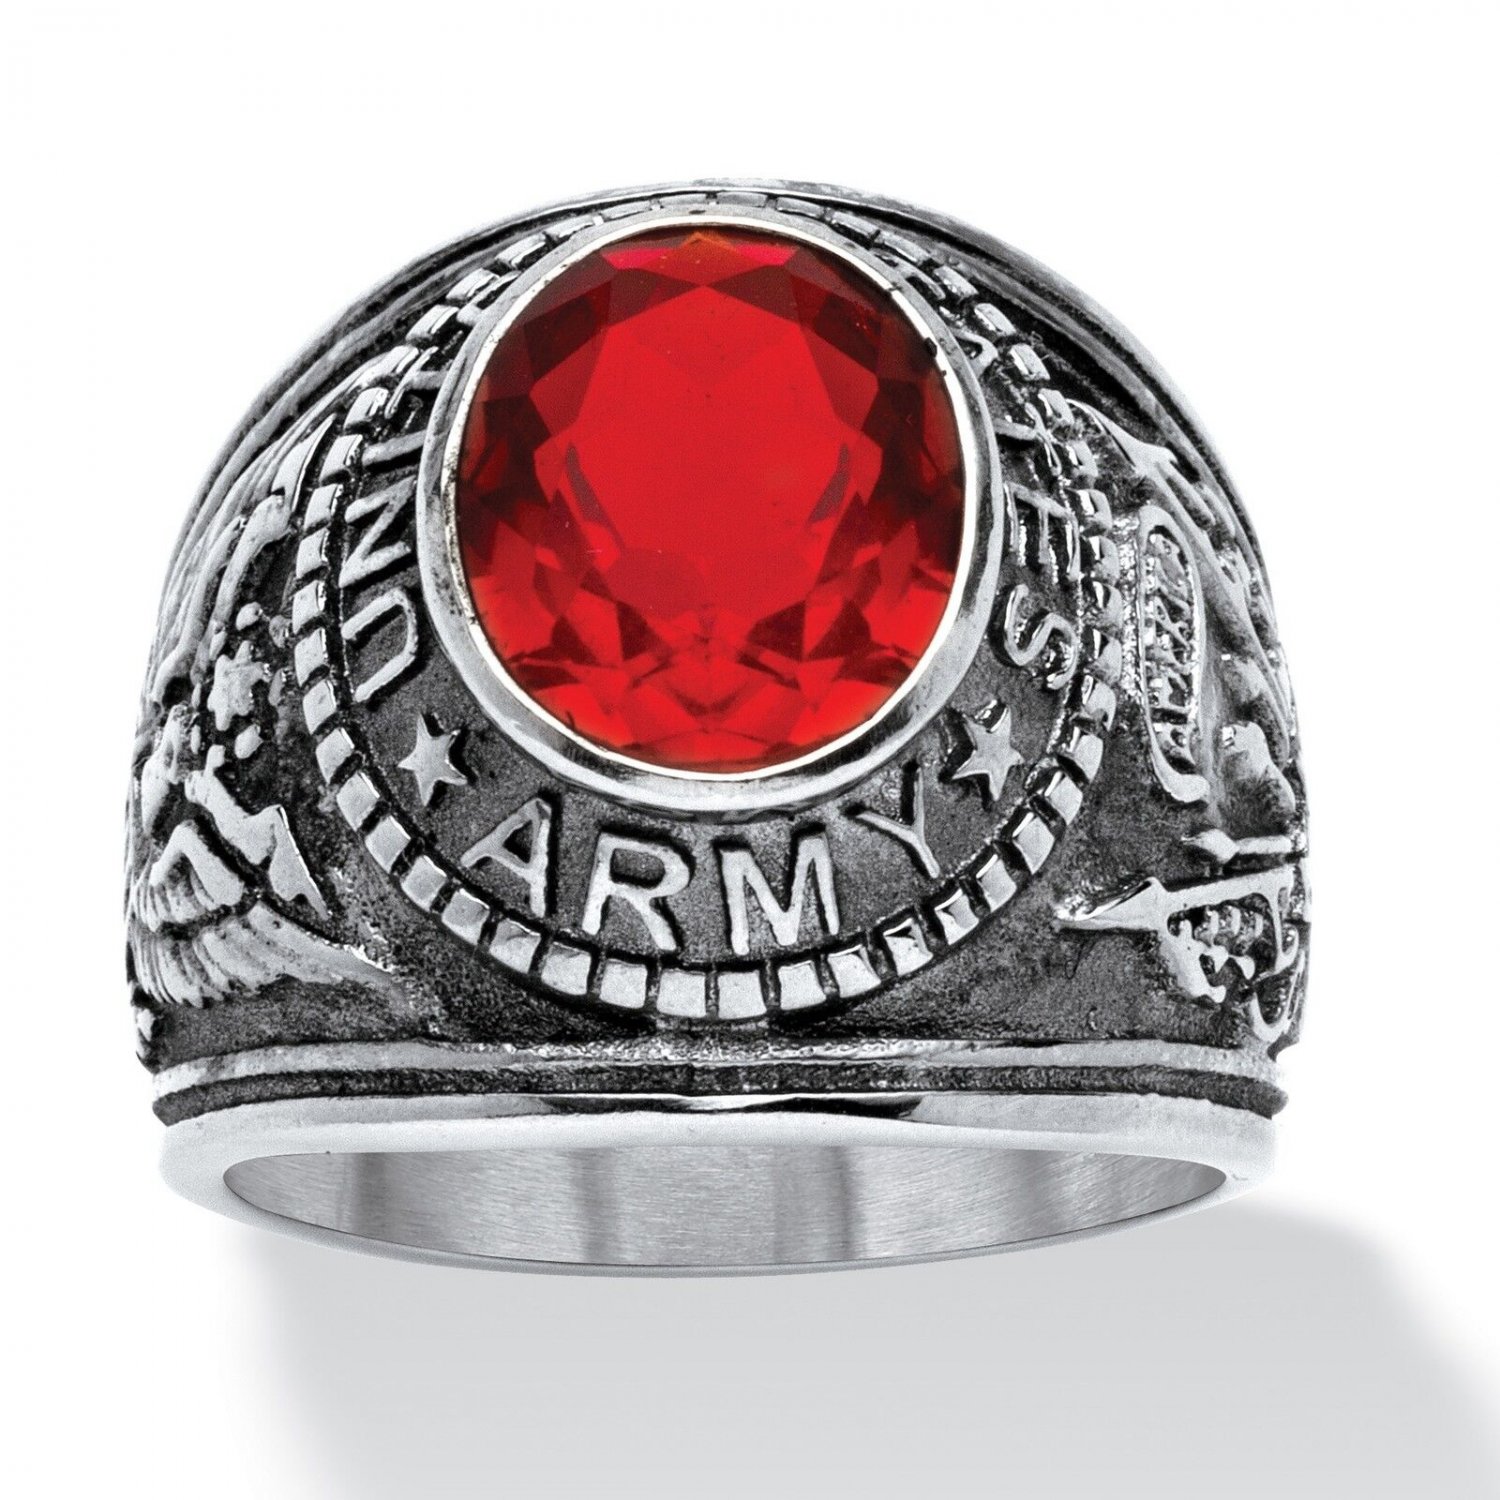 ARMY RUBY STAINLESS STEEL MILITARY RING ALL SIZES 8 9 10 11 12 13